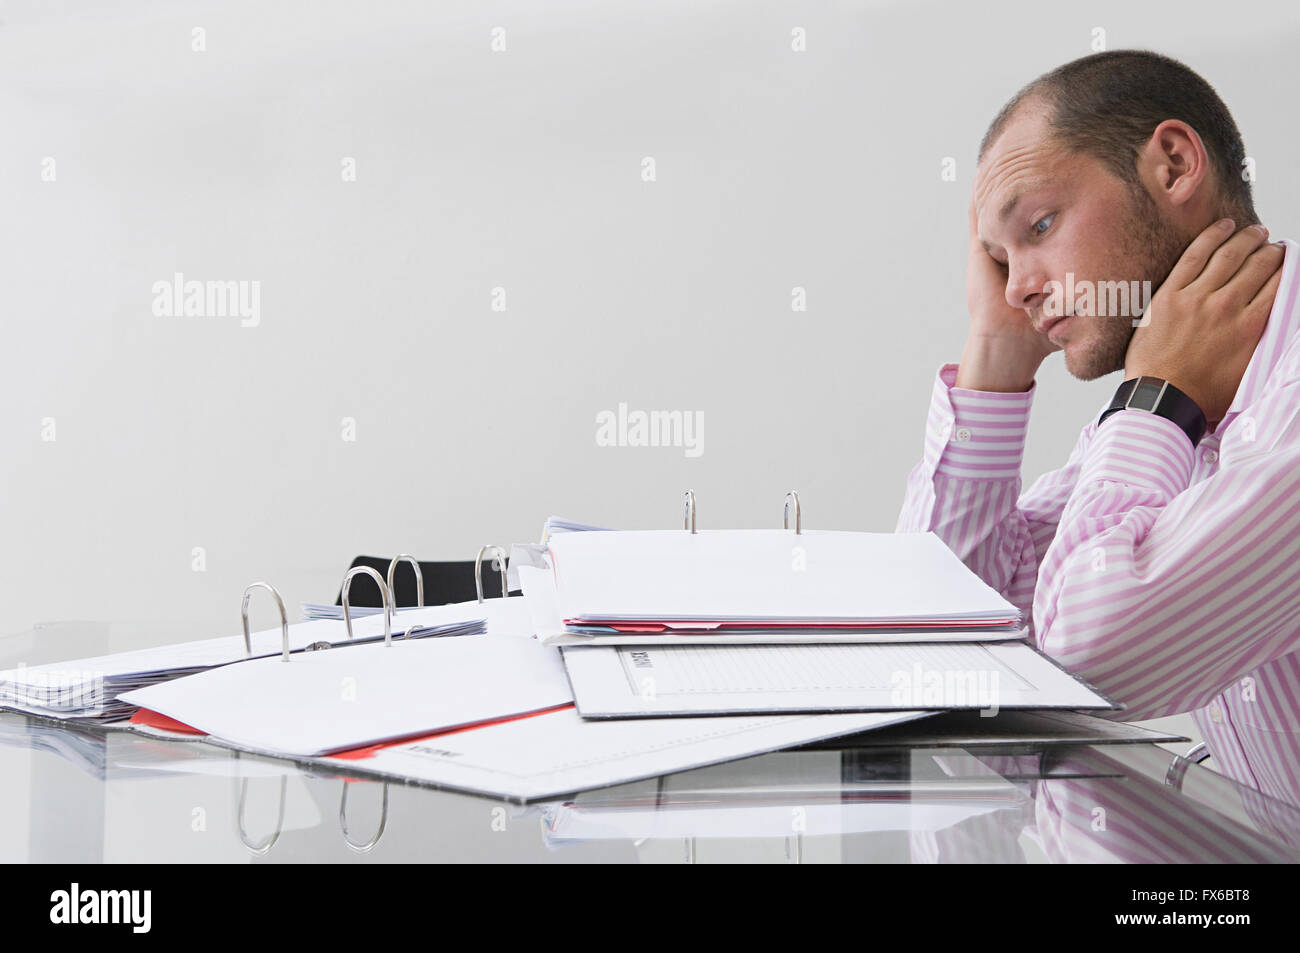 Caucasian businessman working in office Banque D'Images